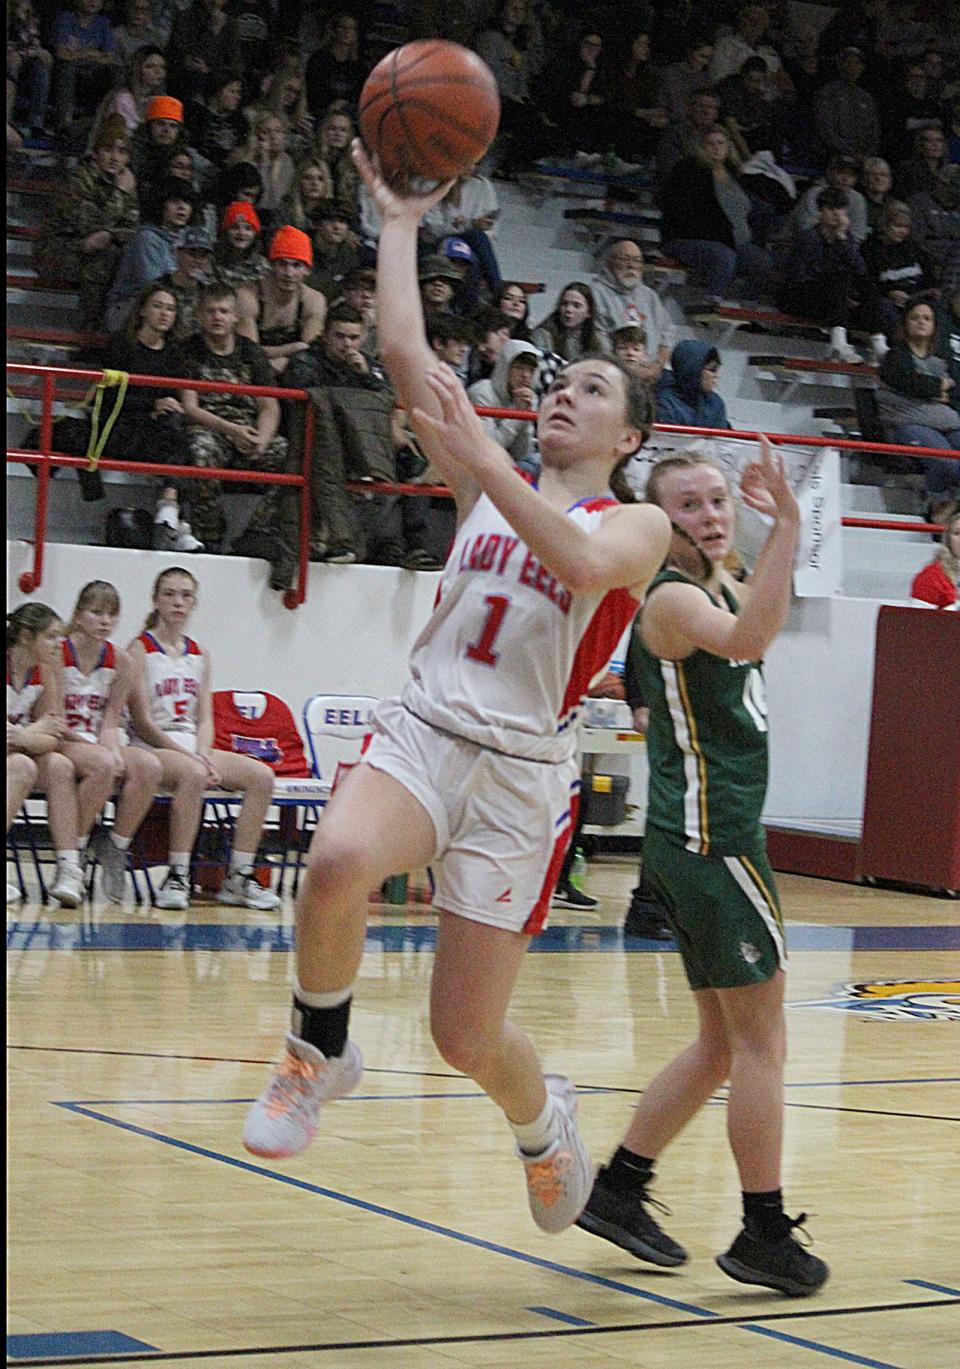 Eminence sophomore Bella Dittemore hits a layup during Wednesday's Powder Keg game against Monrovia.